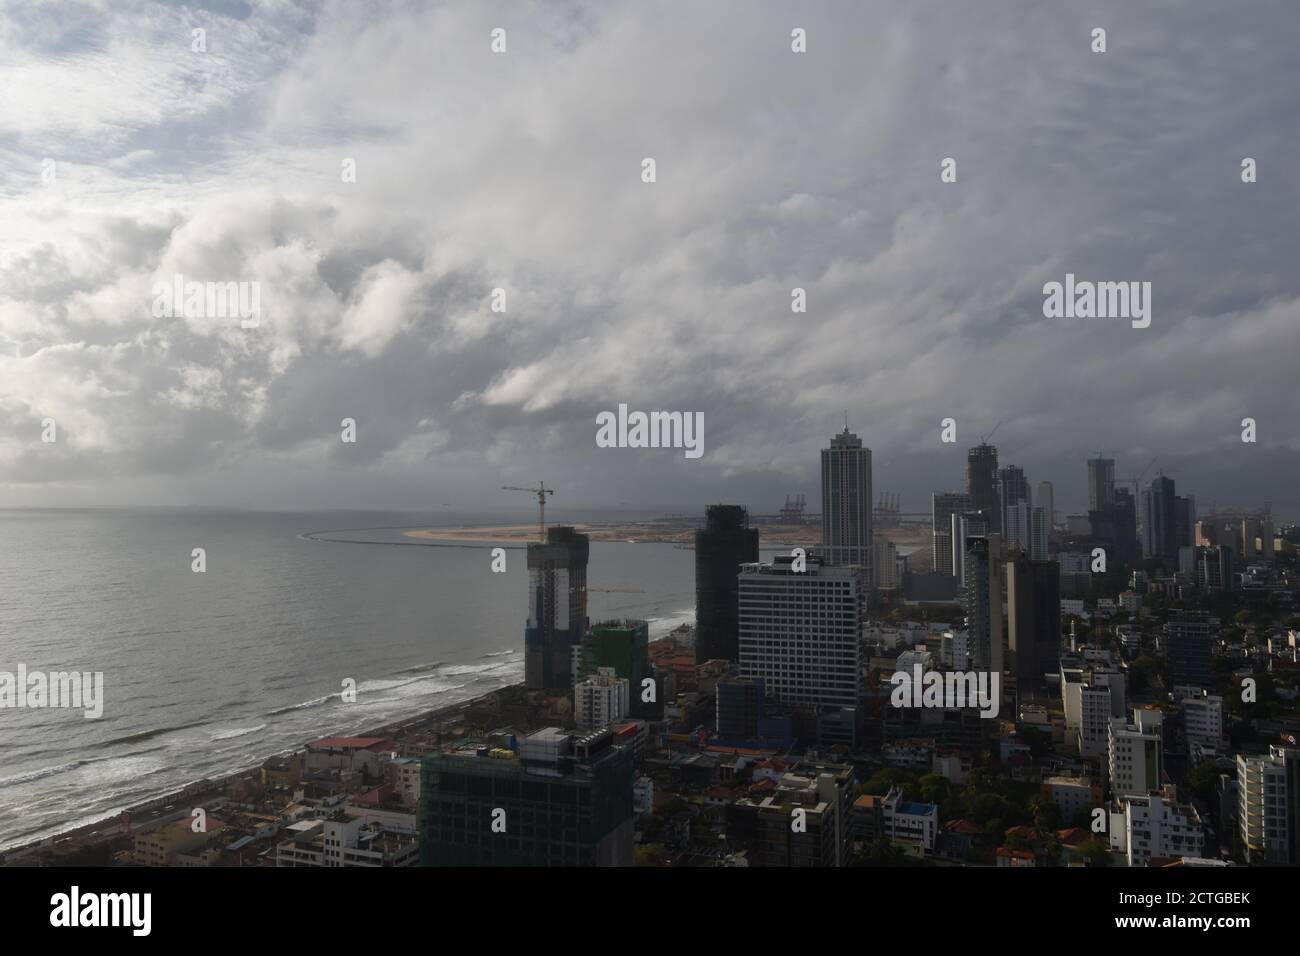 View of the Indian Ocean from a skyscraper in Colombo, Sri Lanka Stock Photo